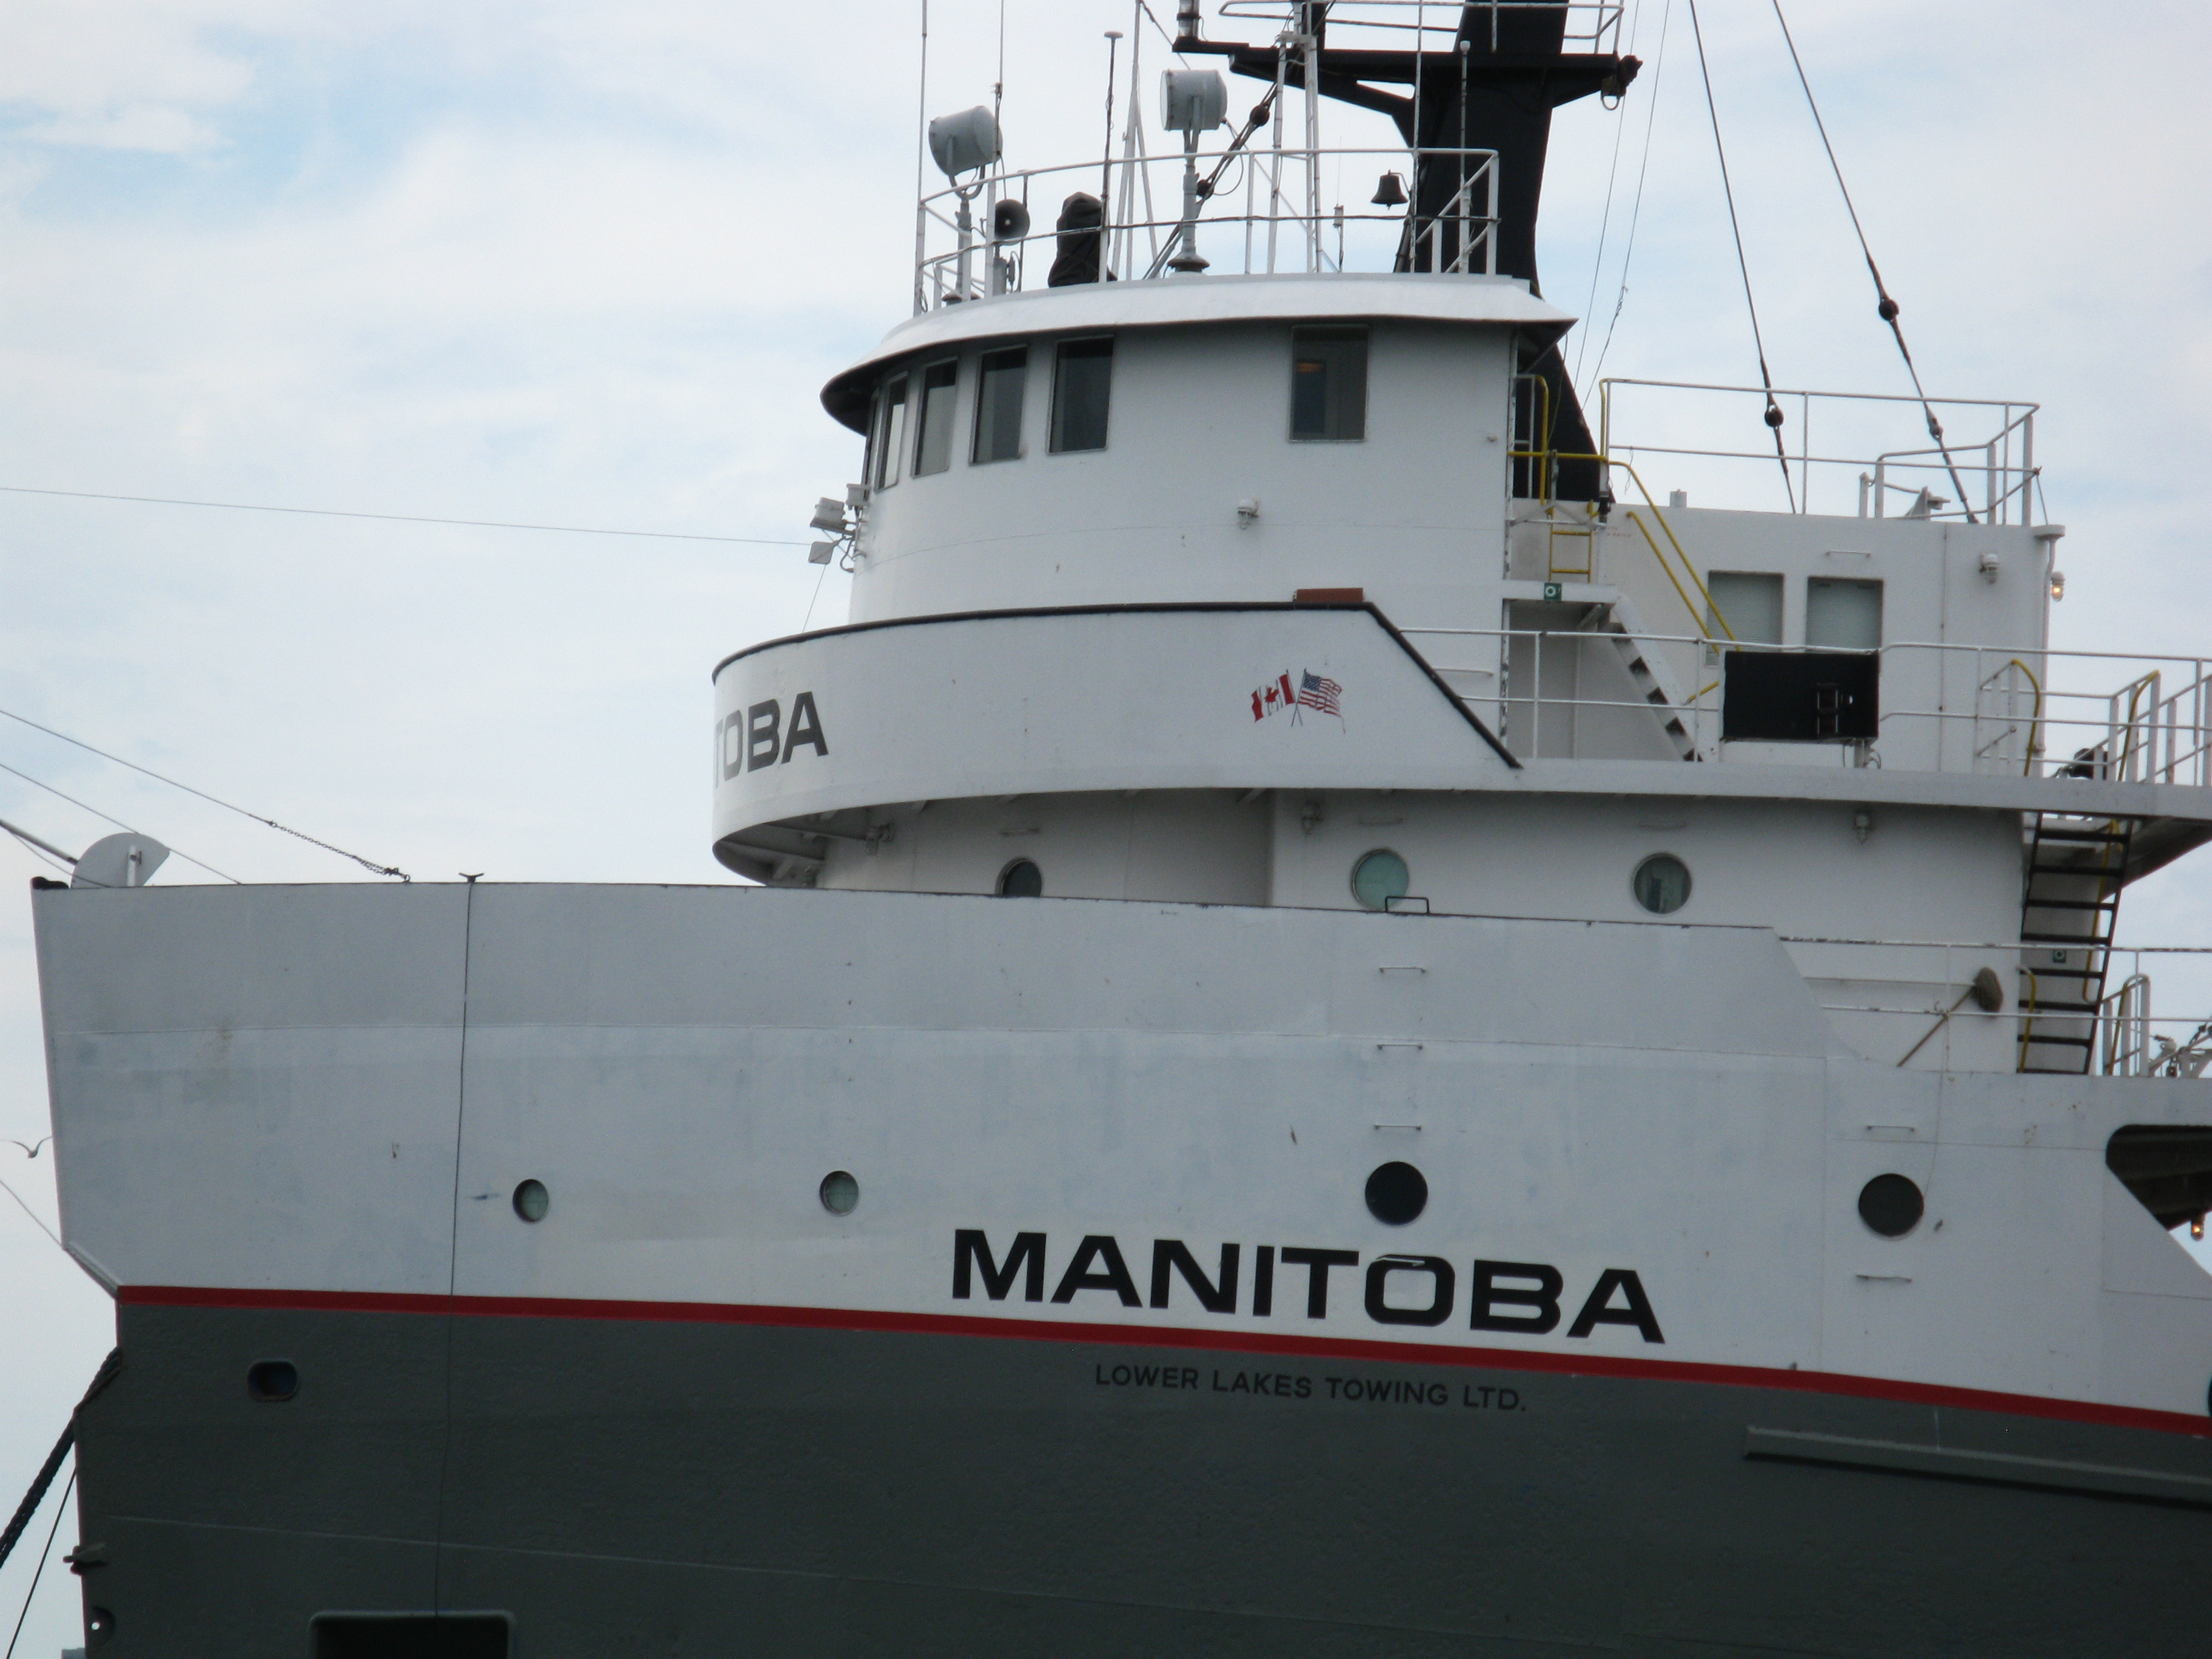 Looking north at the lake freighter manitoba, moored in the polson slip -b.jpg photo